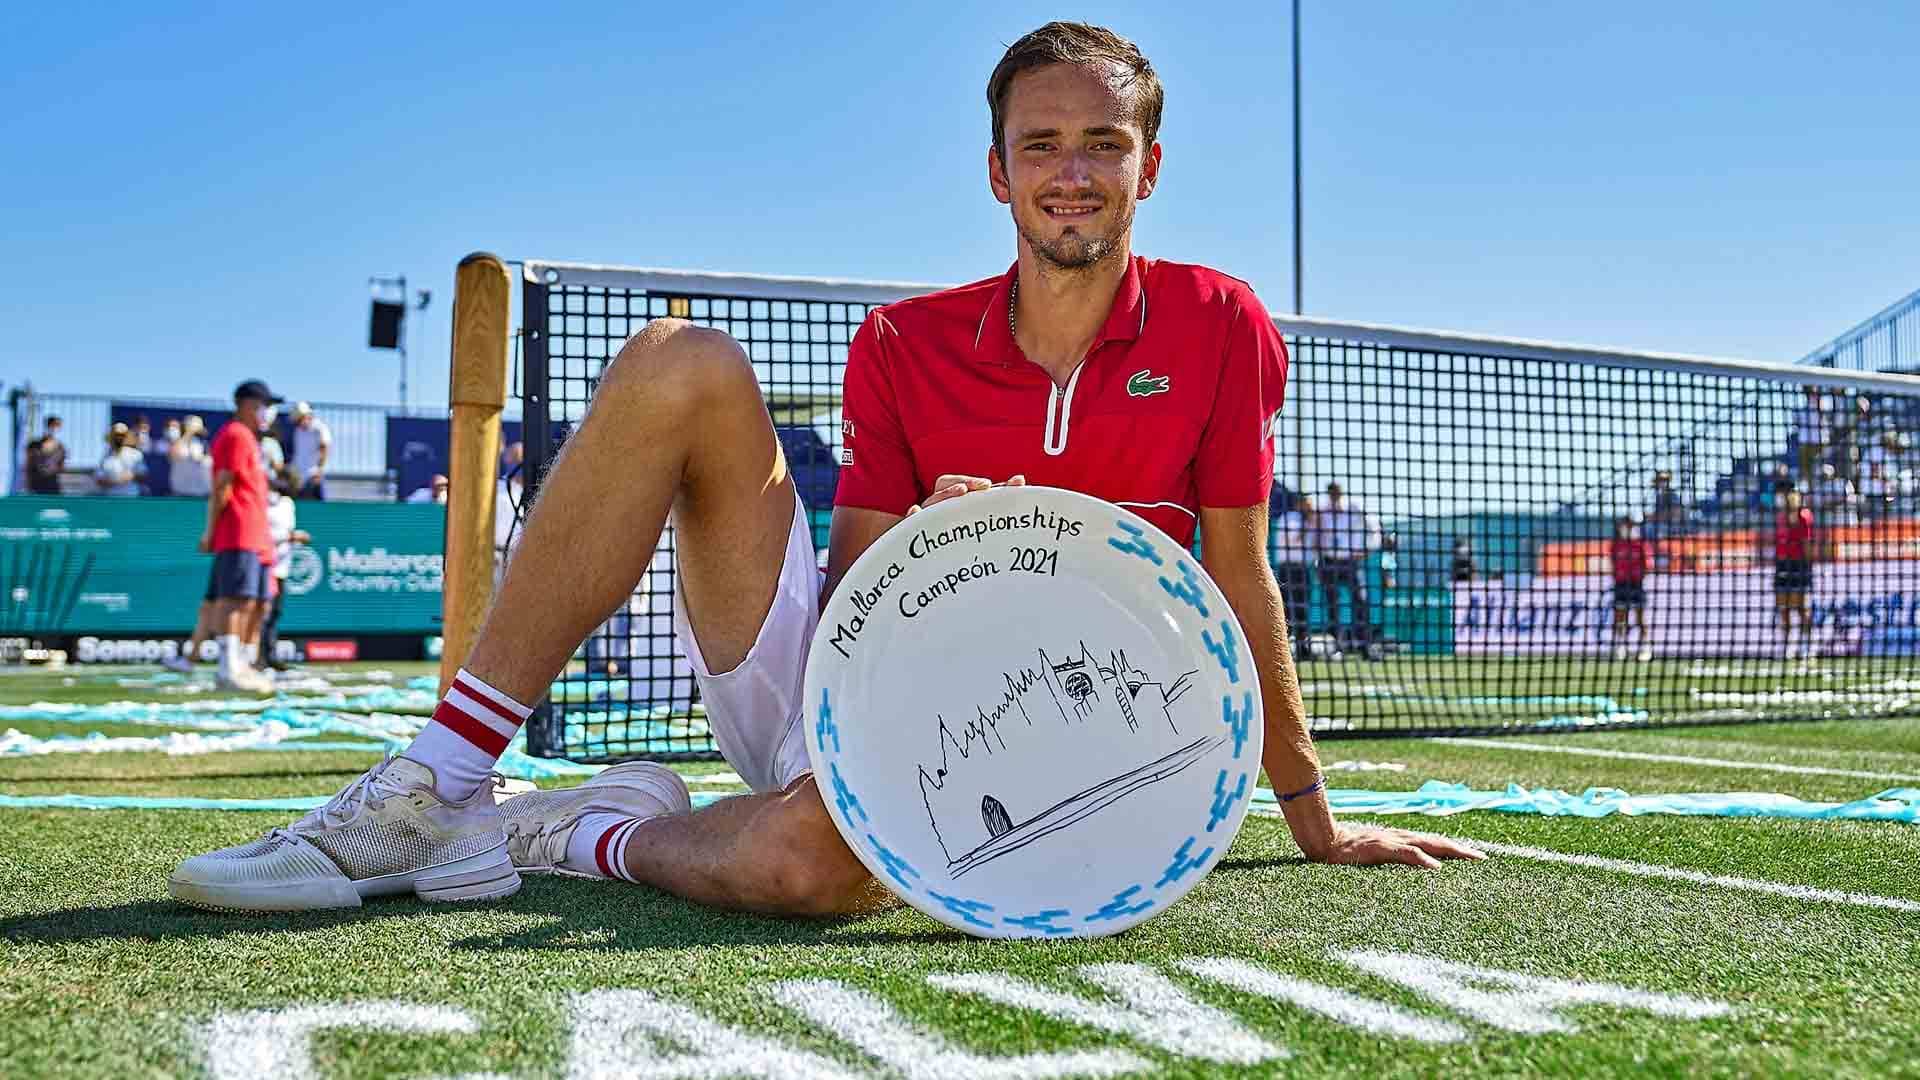 Håbefuld protein forbinde Mallorca | Overview | ATP Tour | Tennis